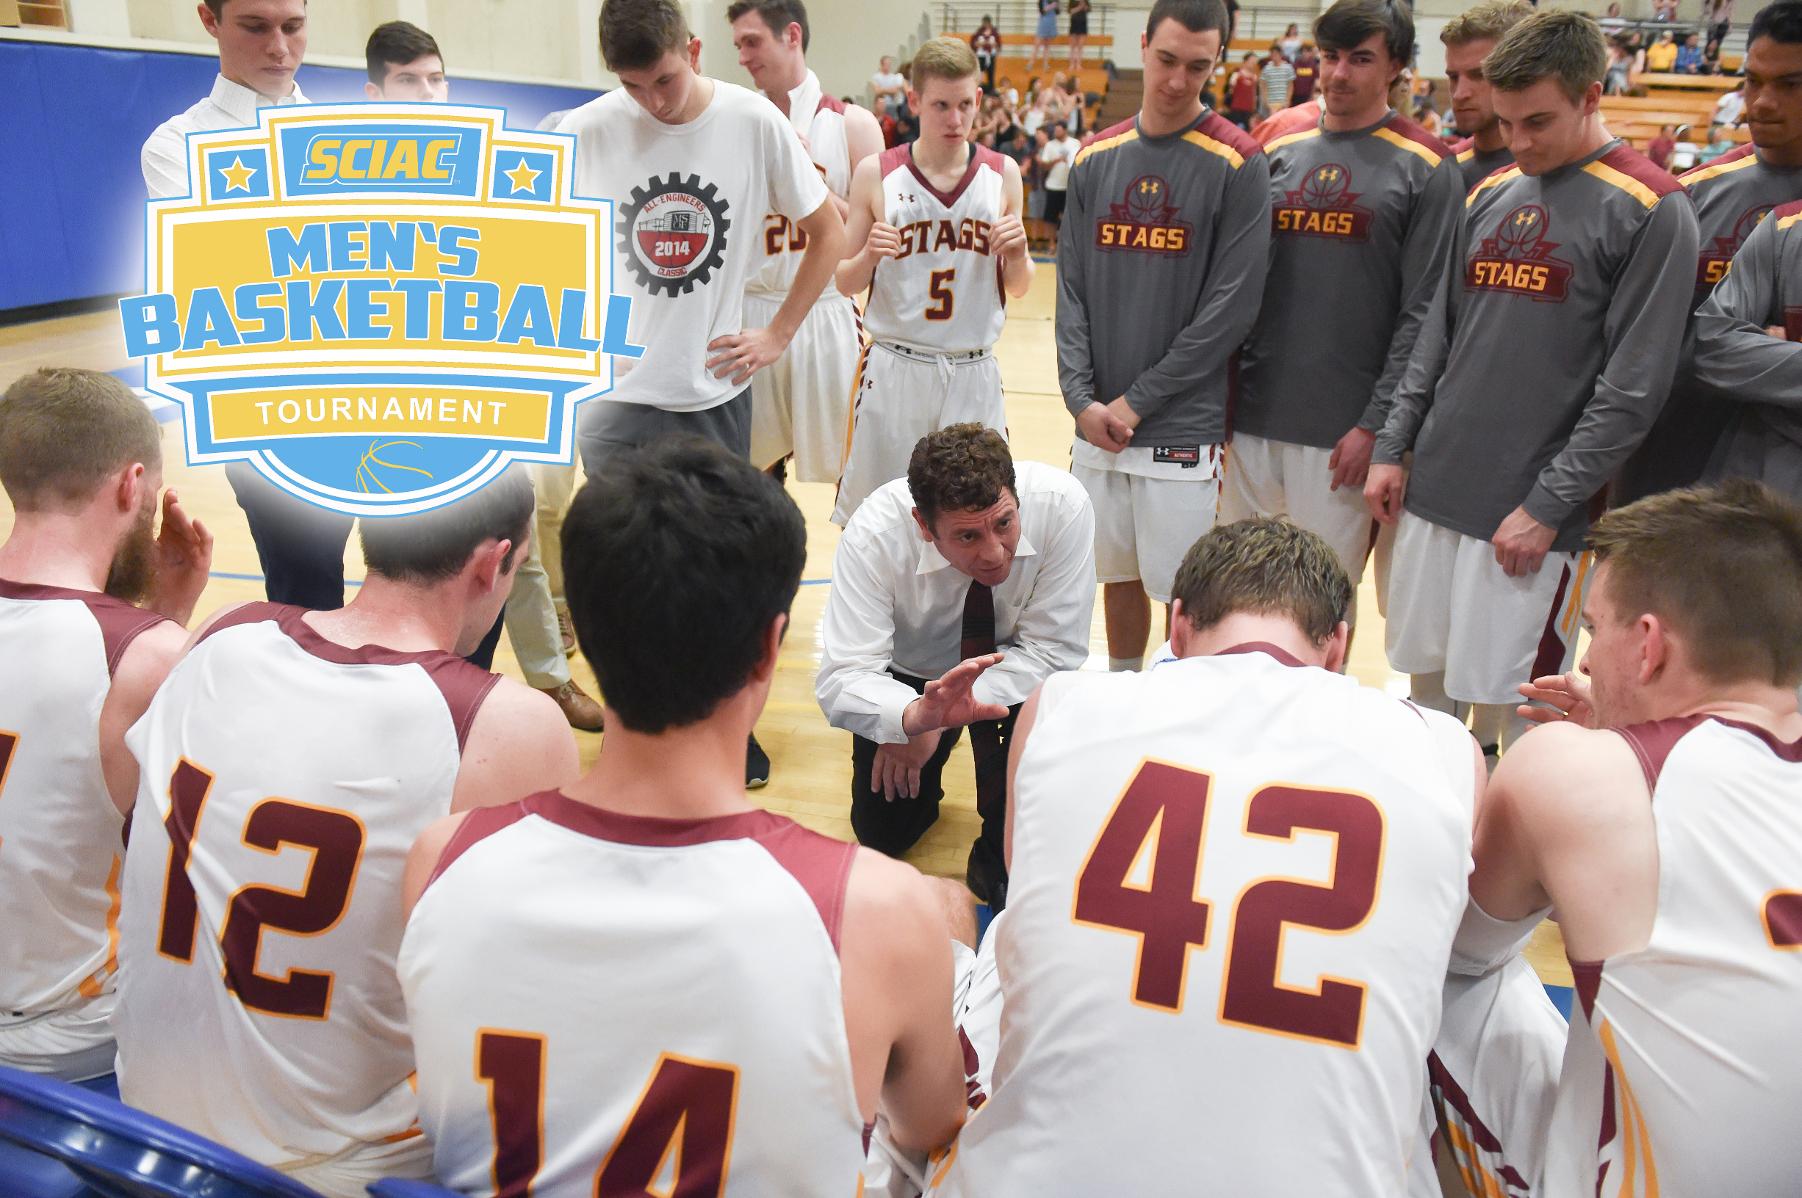 Stags earn No. 4 seed in SCIAC Postseason Tournament to face Chapman in semifinal